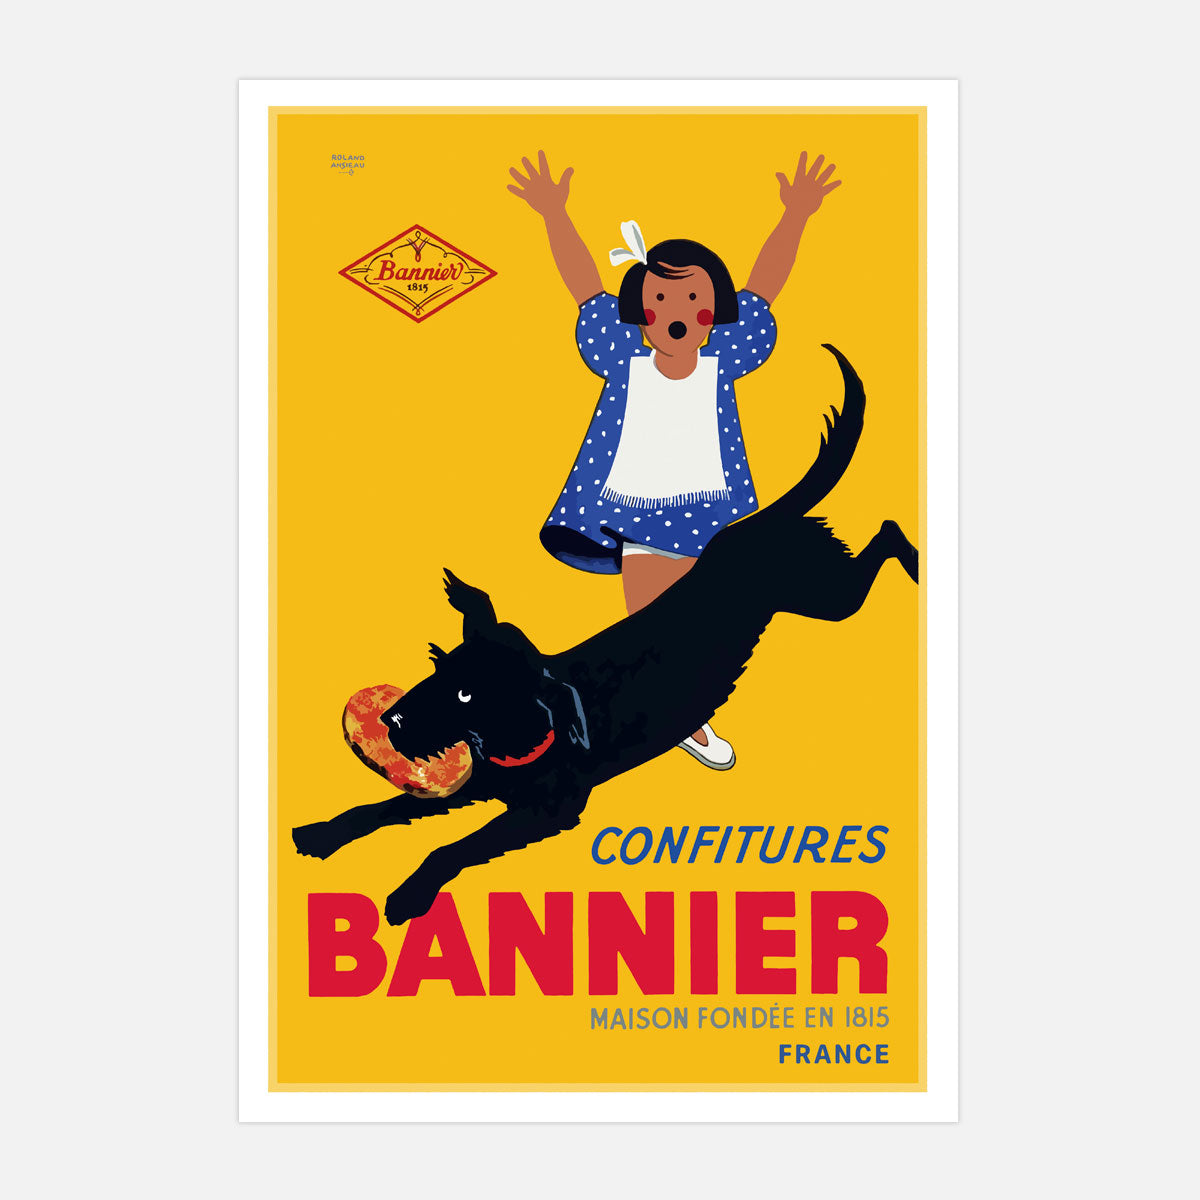 Bannier France retro vintage advertising print from Places We Luv